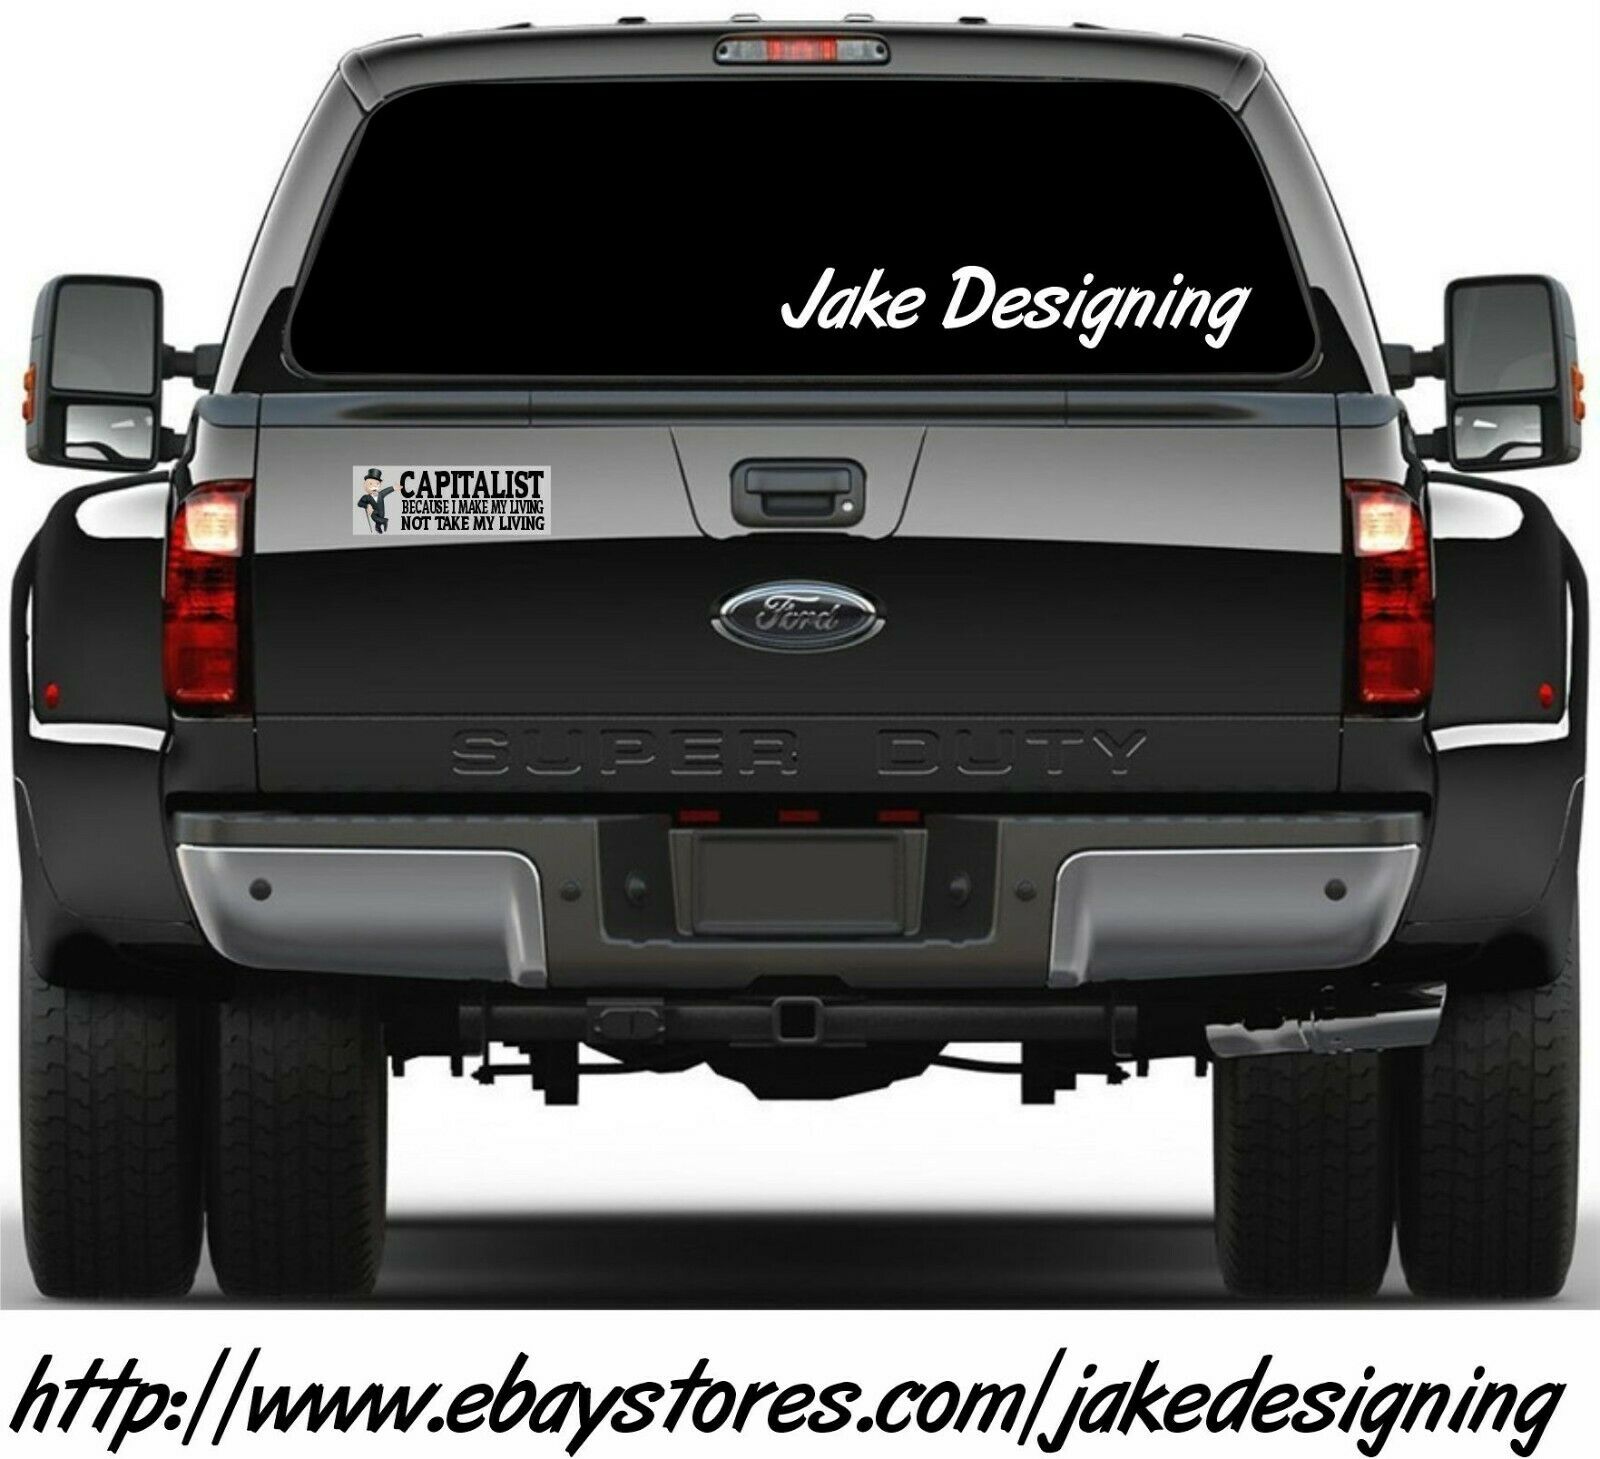 Capitalist Conservative "Make my living not take my living" AUTO MAGNET 8.6x3 - Powercall Sirens LLC